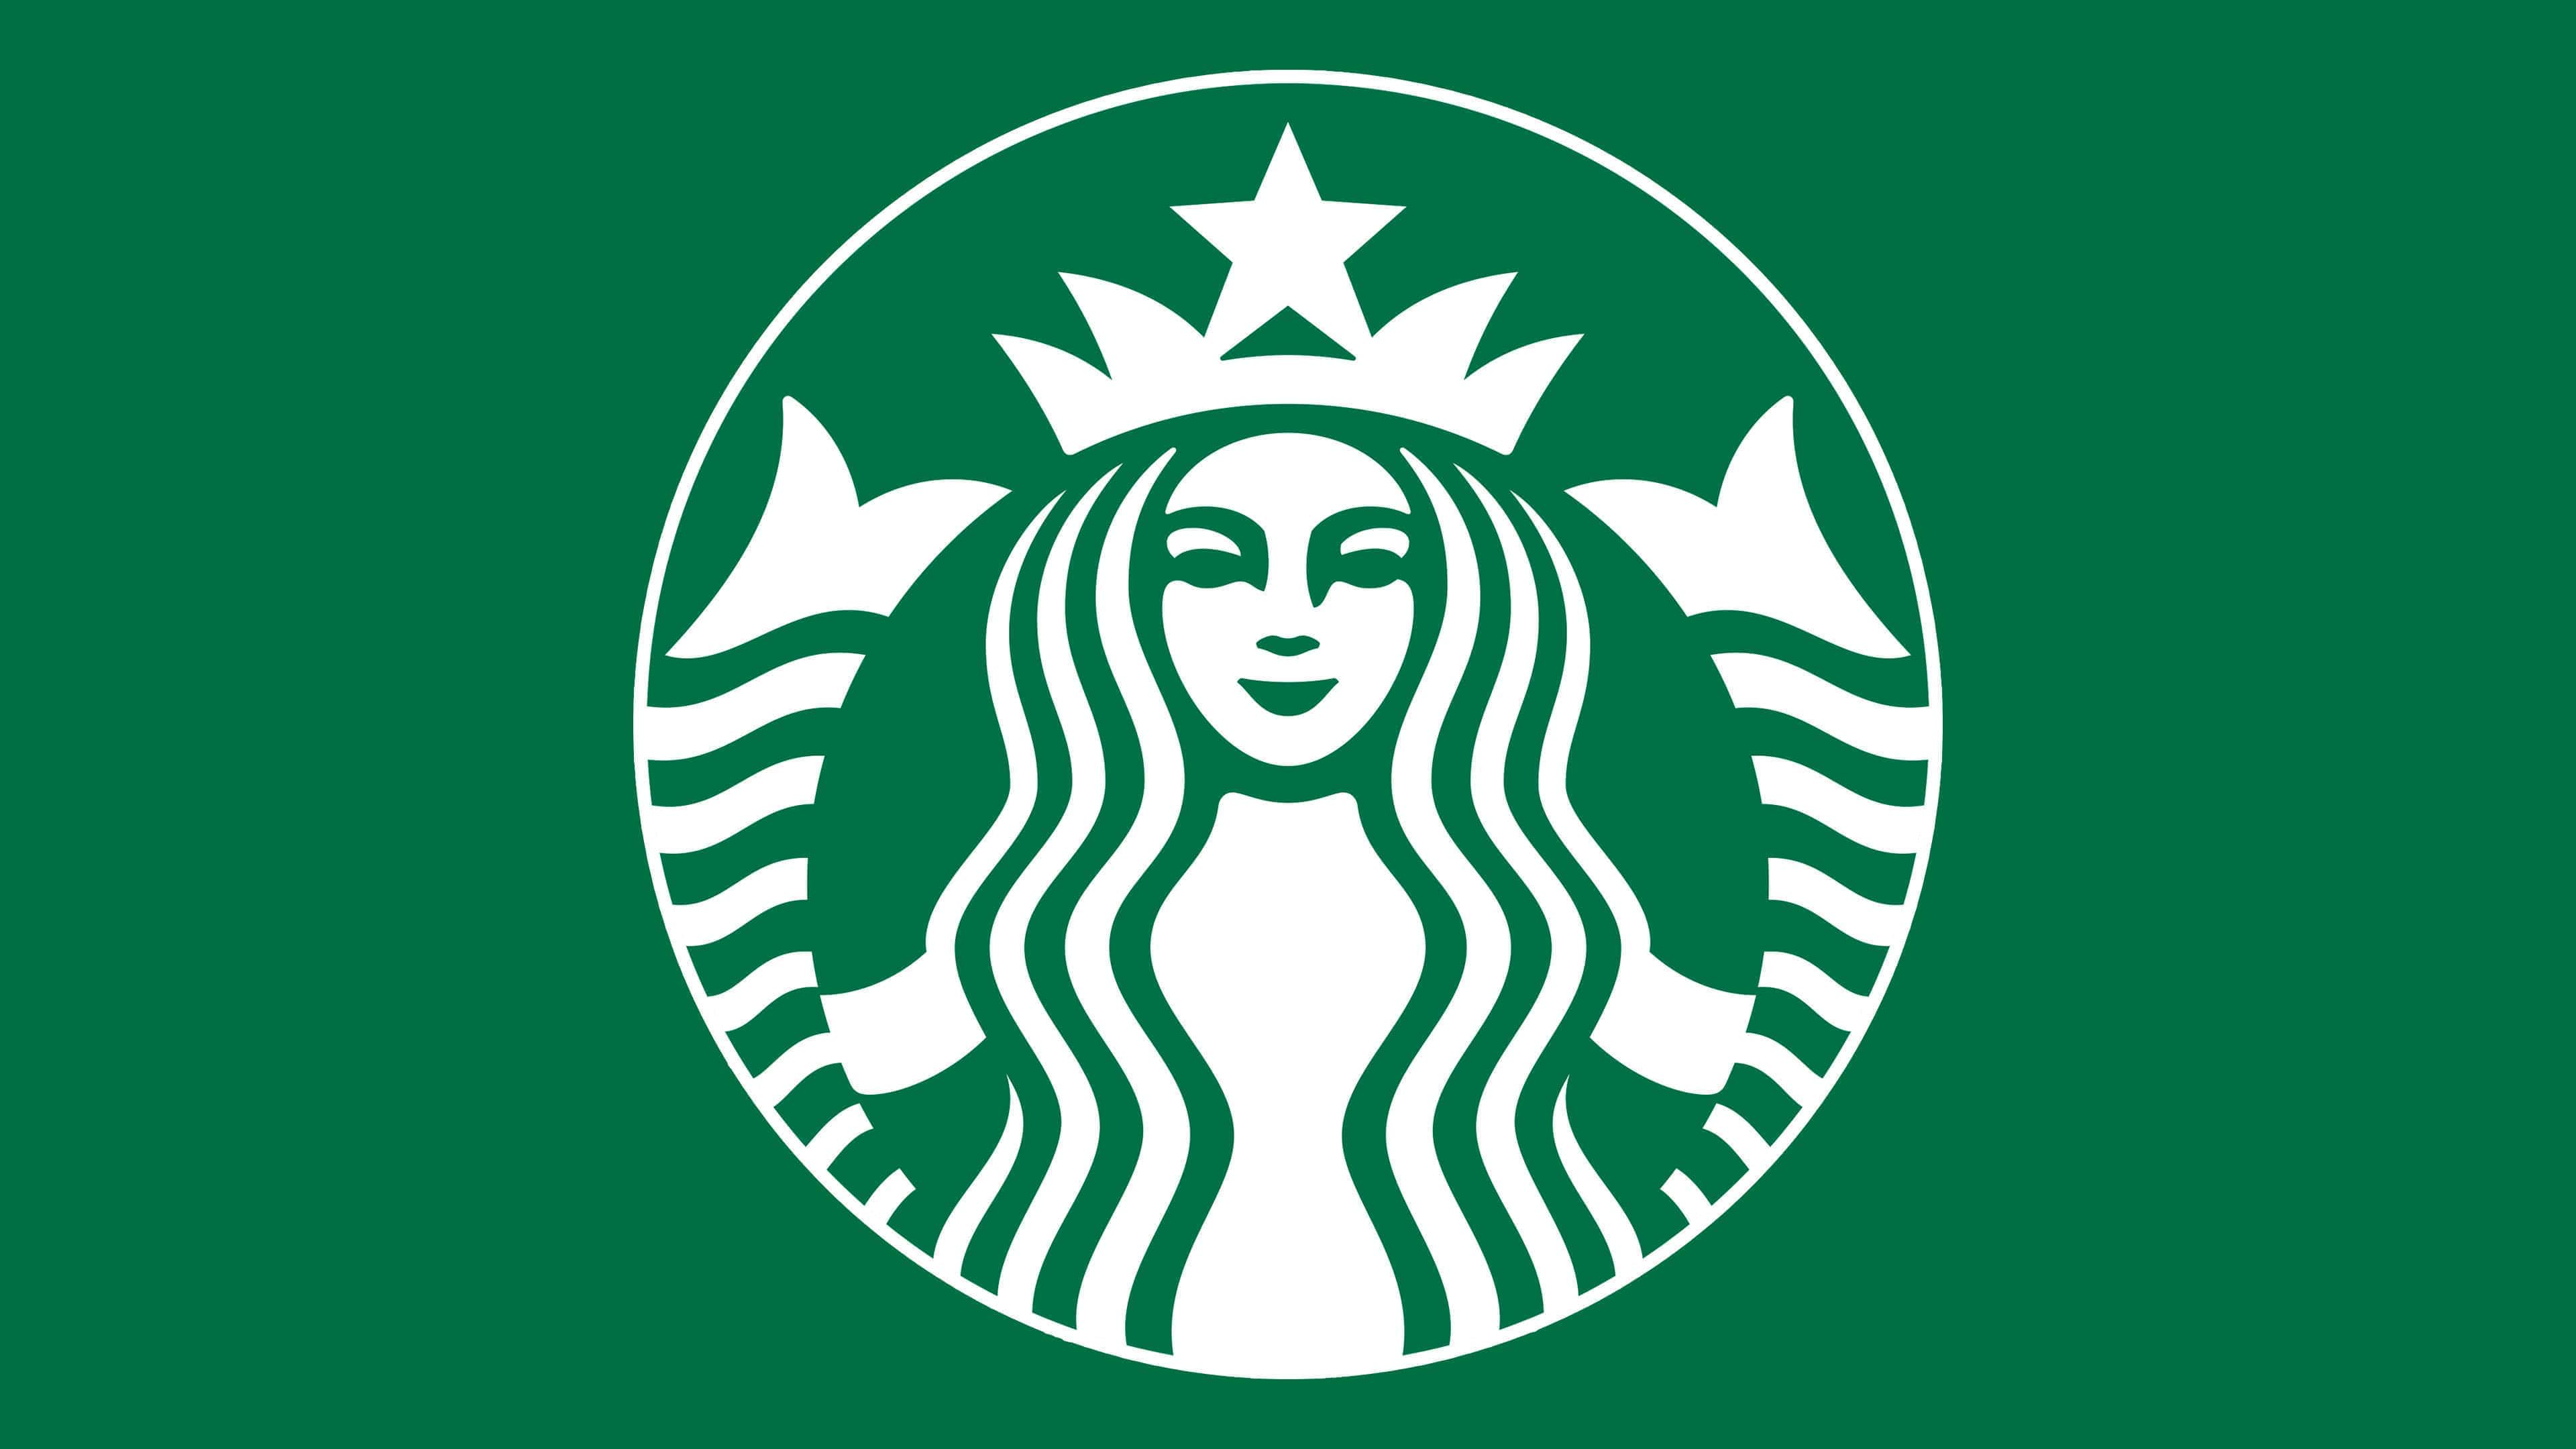 Starbucks Logo, meaning, history, PNG, SVG, vector